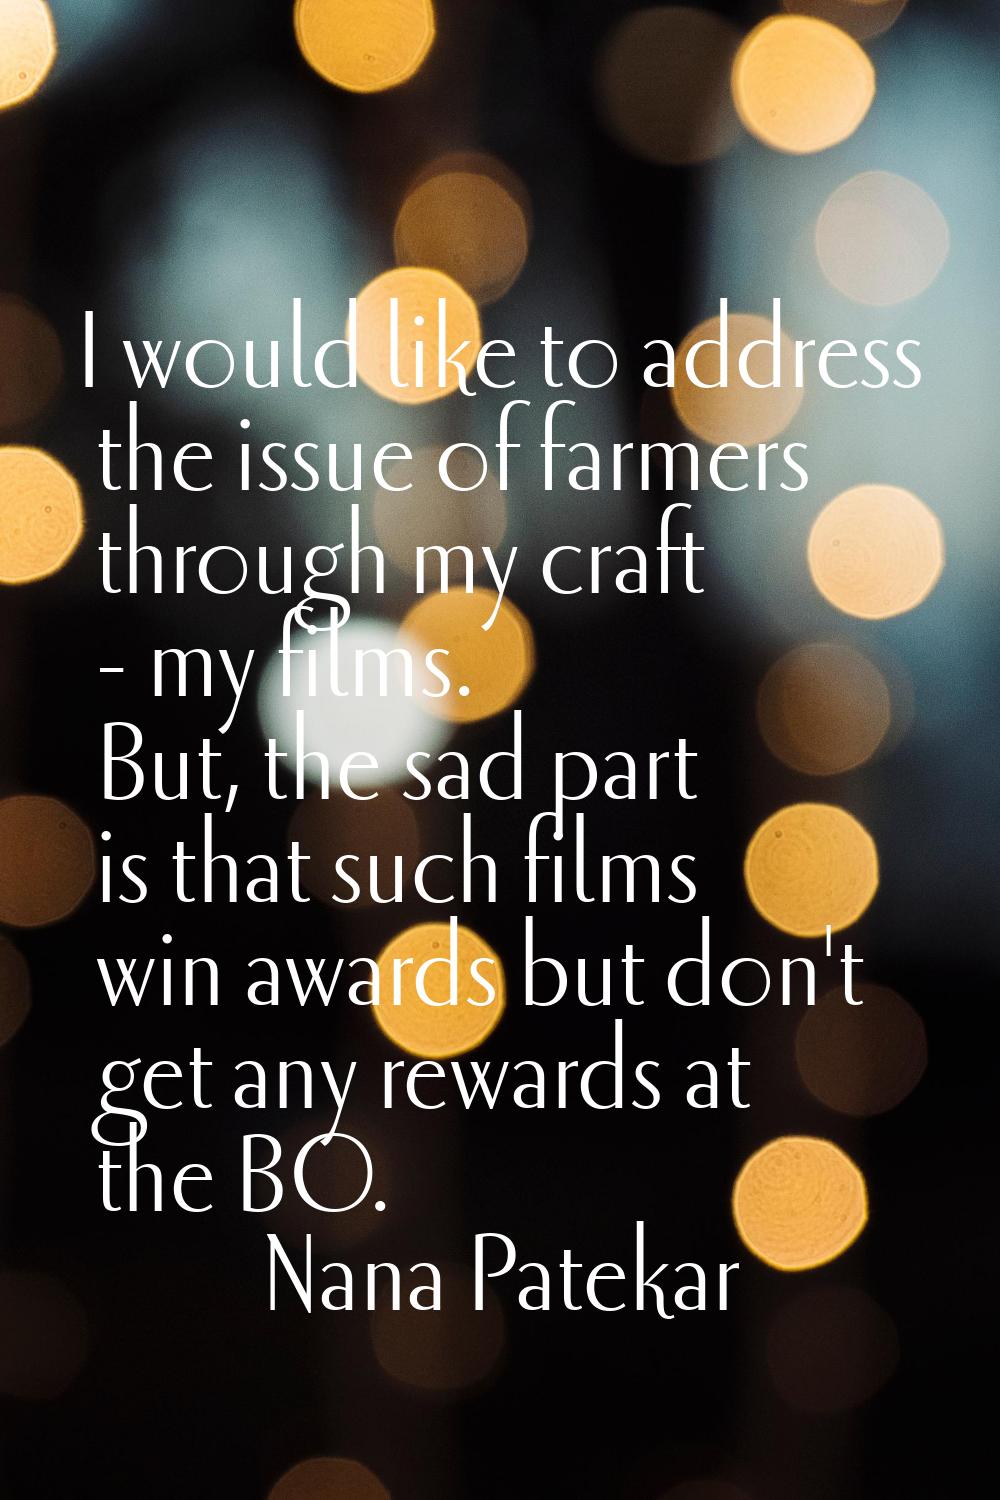 I would like to address the issue of farmers through my craft - my films. But, the sad part is that